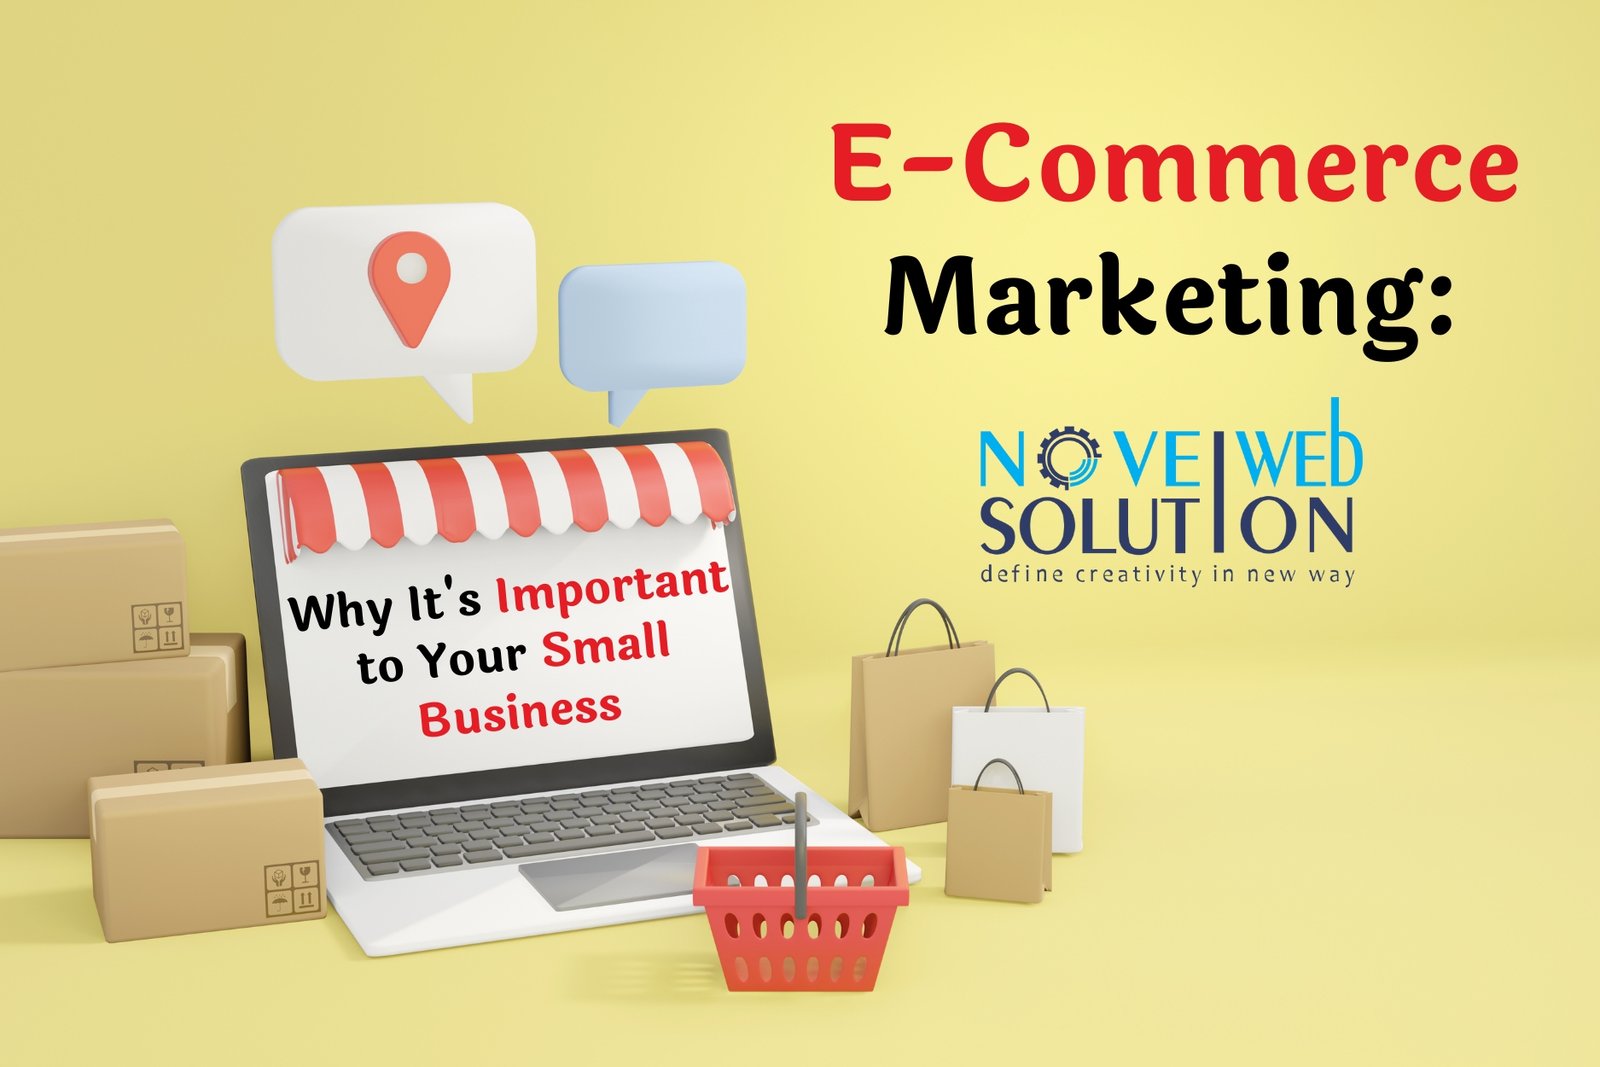 E-Commerce Marketing: Why It's Important to Your Small Business